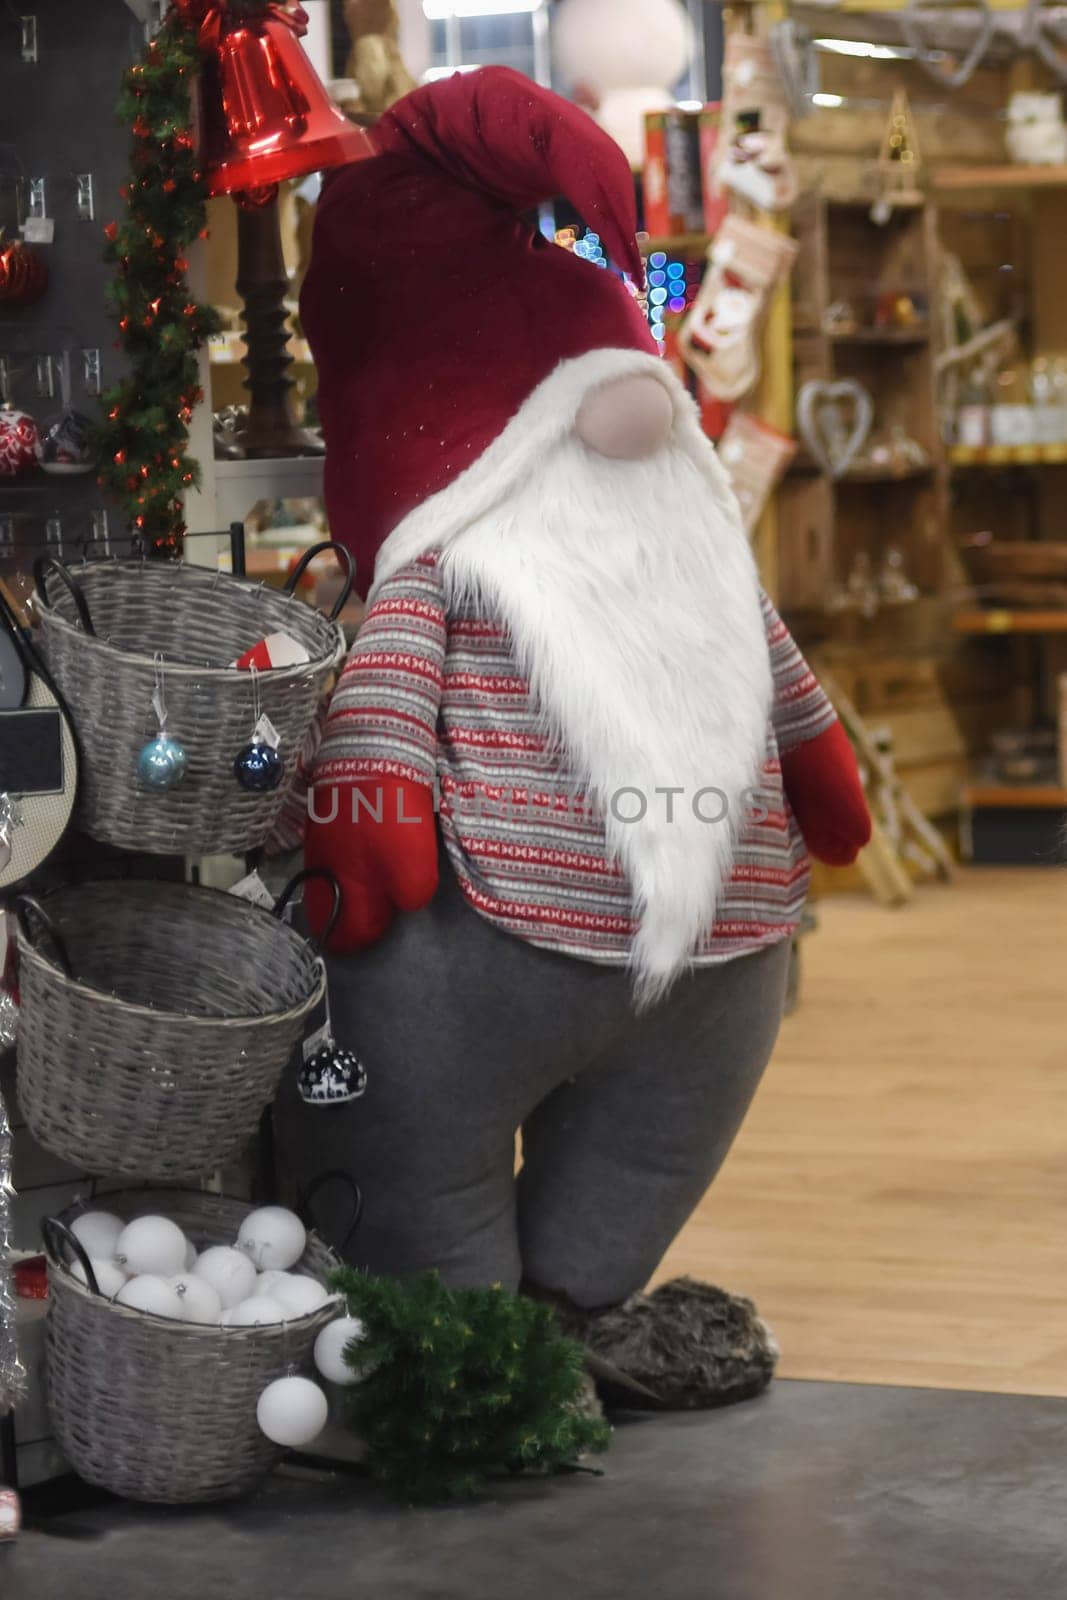 Santa Claus in a store with toys and decorations